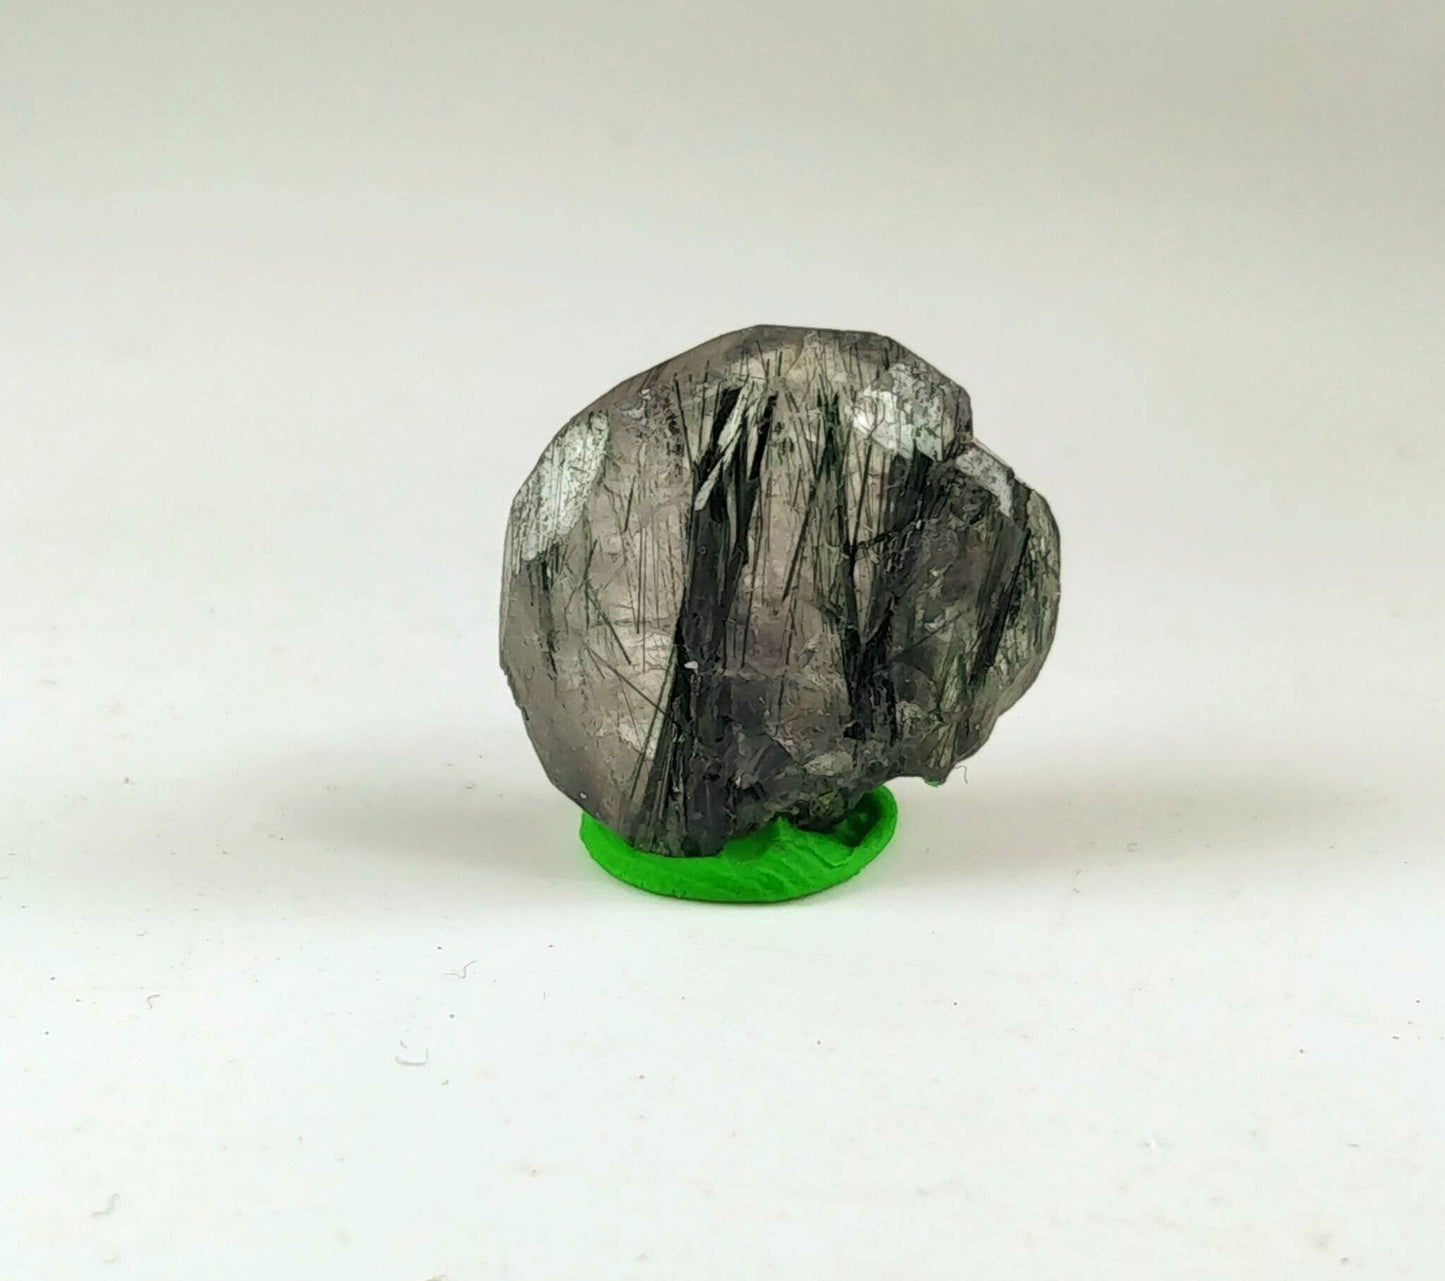 ARSAA GEMS AND MINERALSApatite with actinolite inclusion transparent small thumbnail size crystal from Mohmand Agency KPK Pakistan, weight 3.7 grams - Premium  from ARSAA GEMS AND MINERALS - Just $25.00! Shop now at ARSAA GEMS AND MINERALS